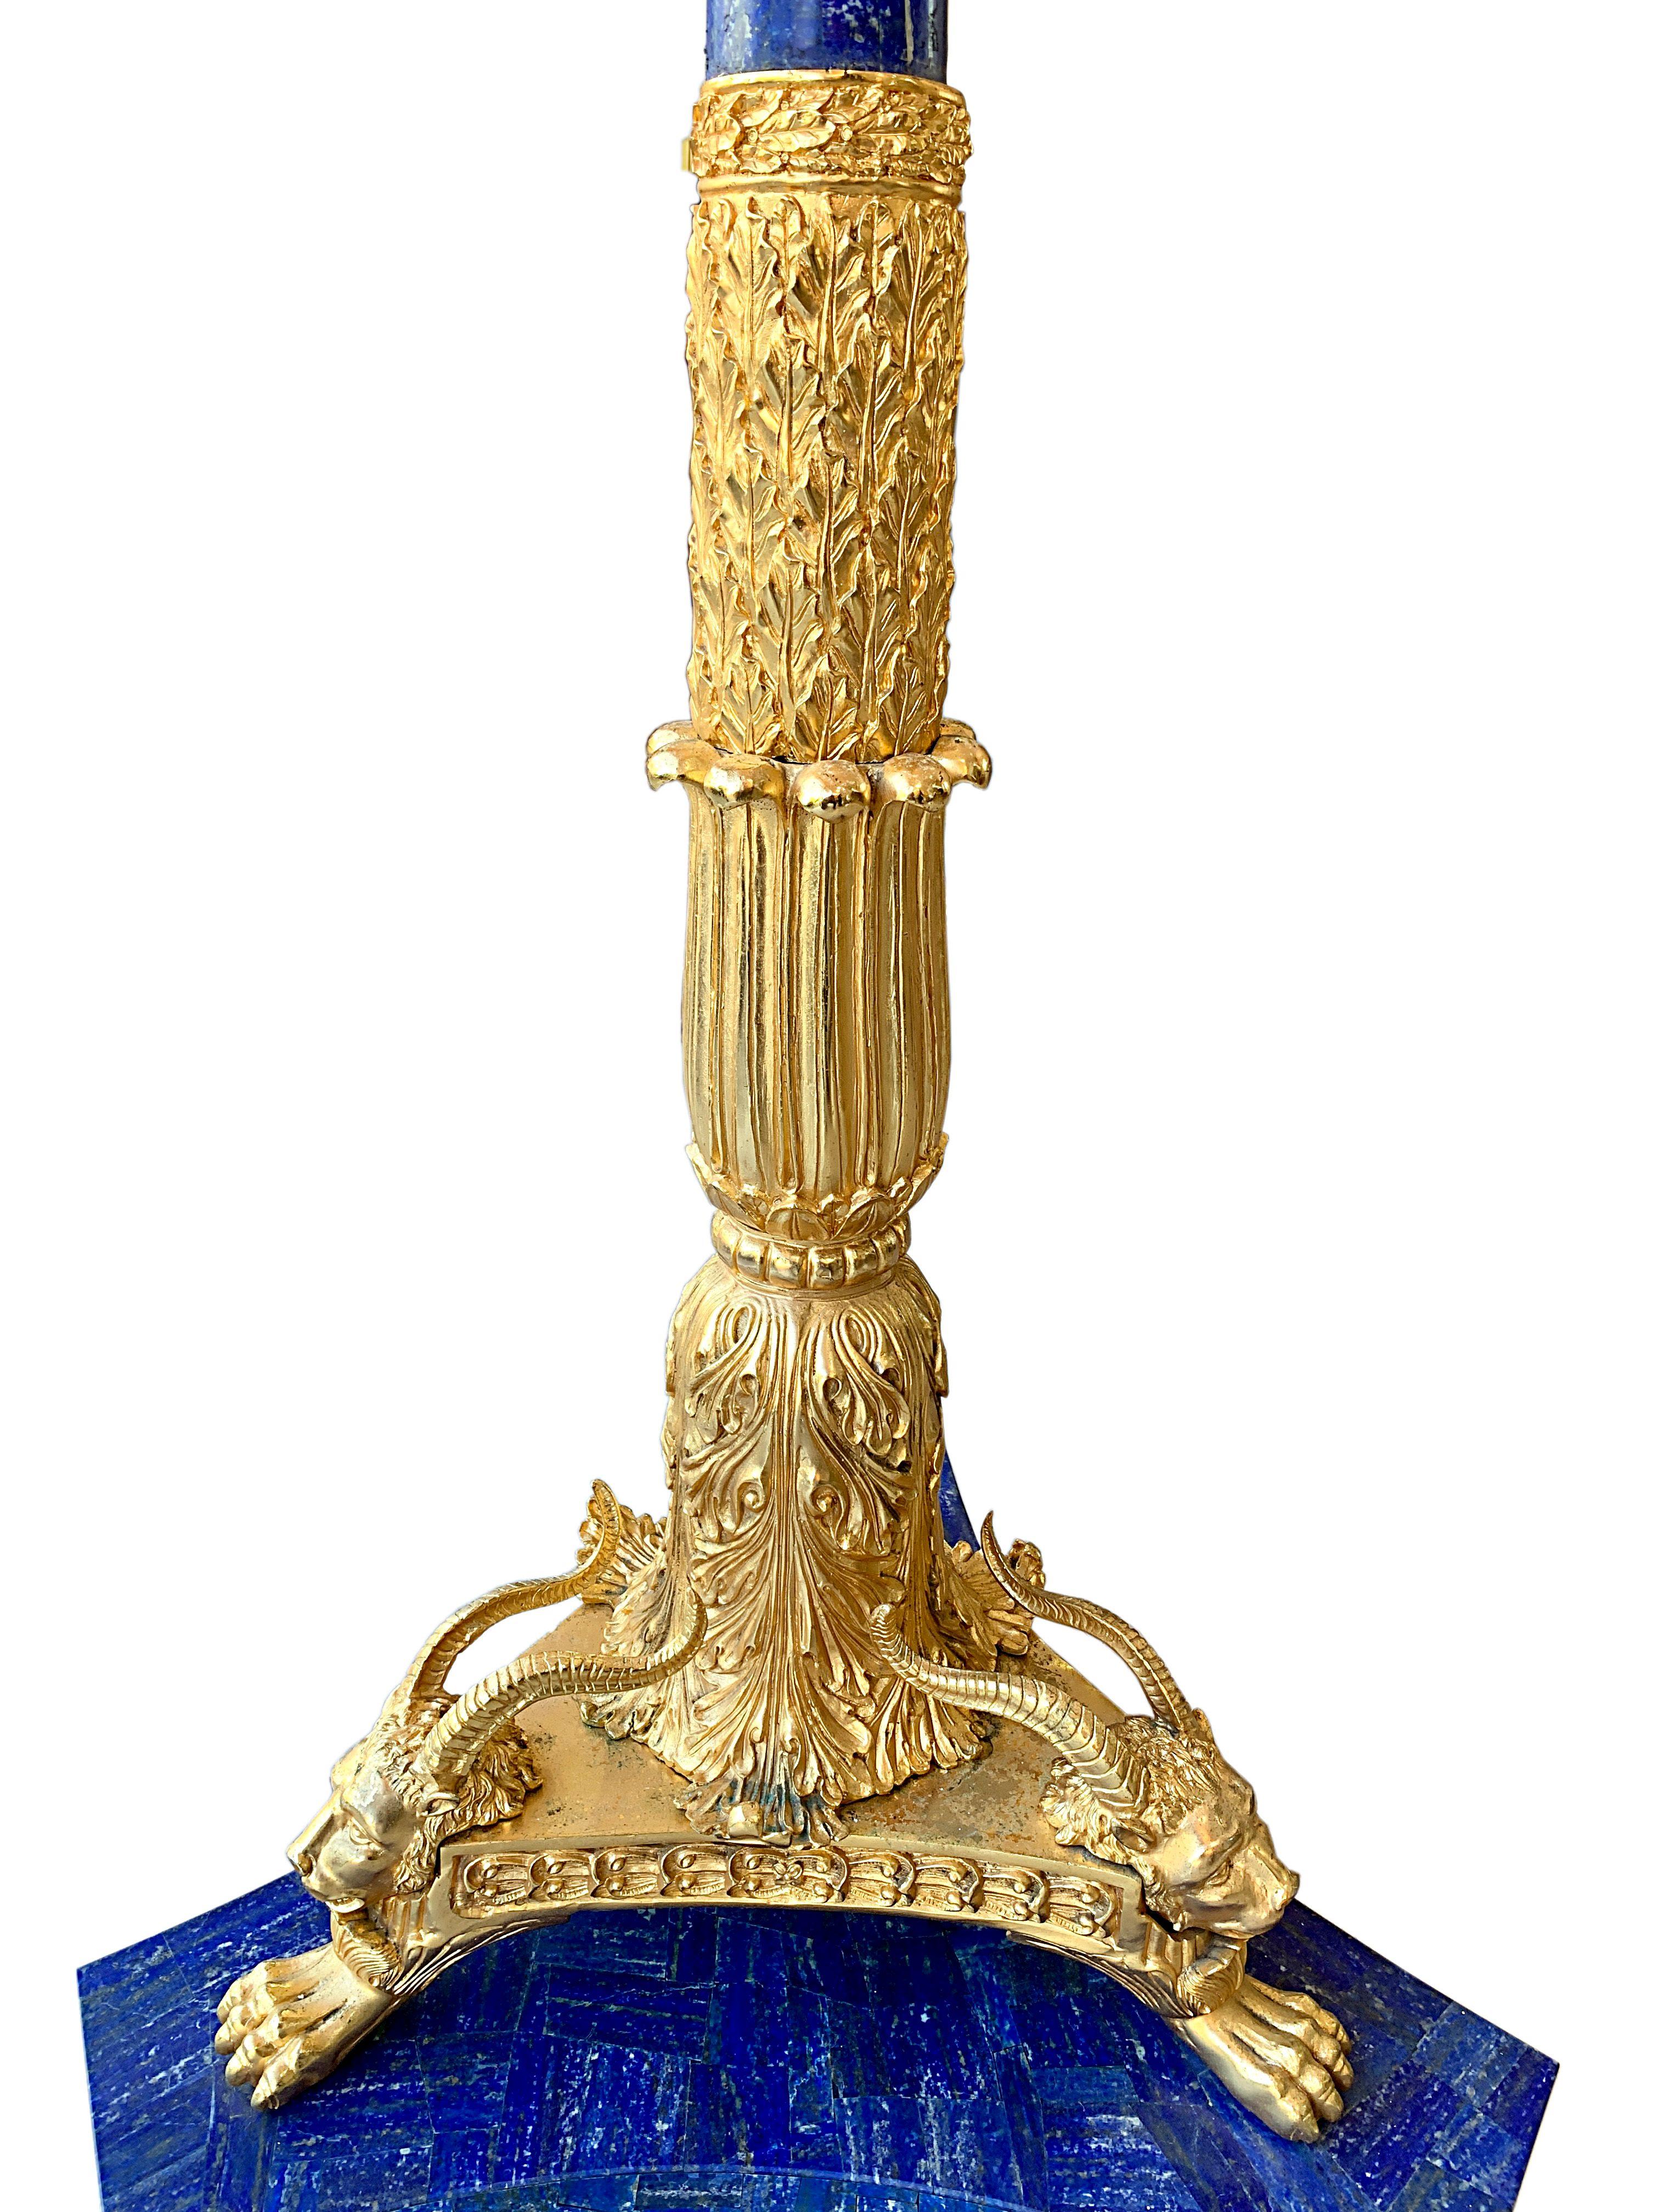 Pair of Monumental Gilt Bronze and Lapis Lazuli Torcheres For Sale 2